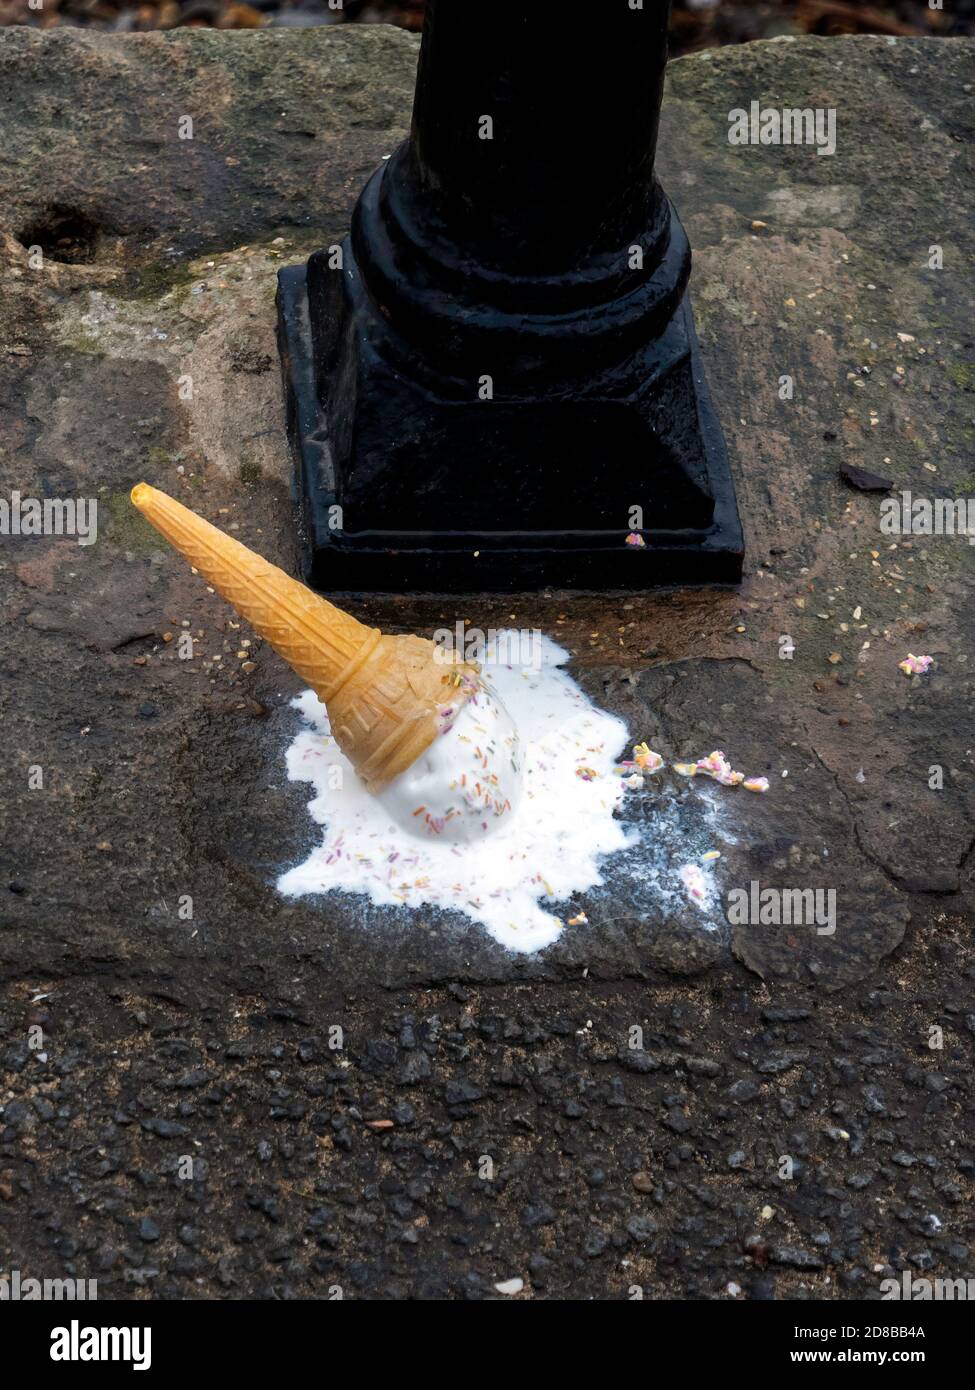 An ice cream cone accidently dropped on the promenade at Saltburn by the sea Stock Photo